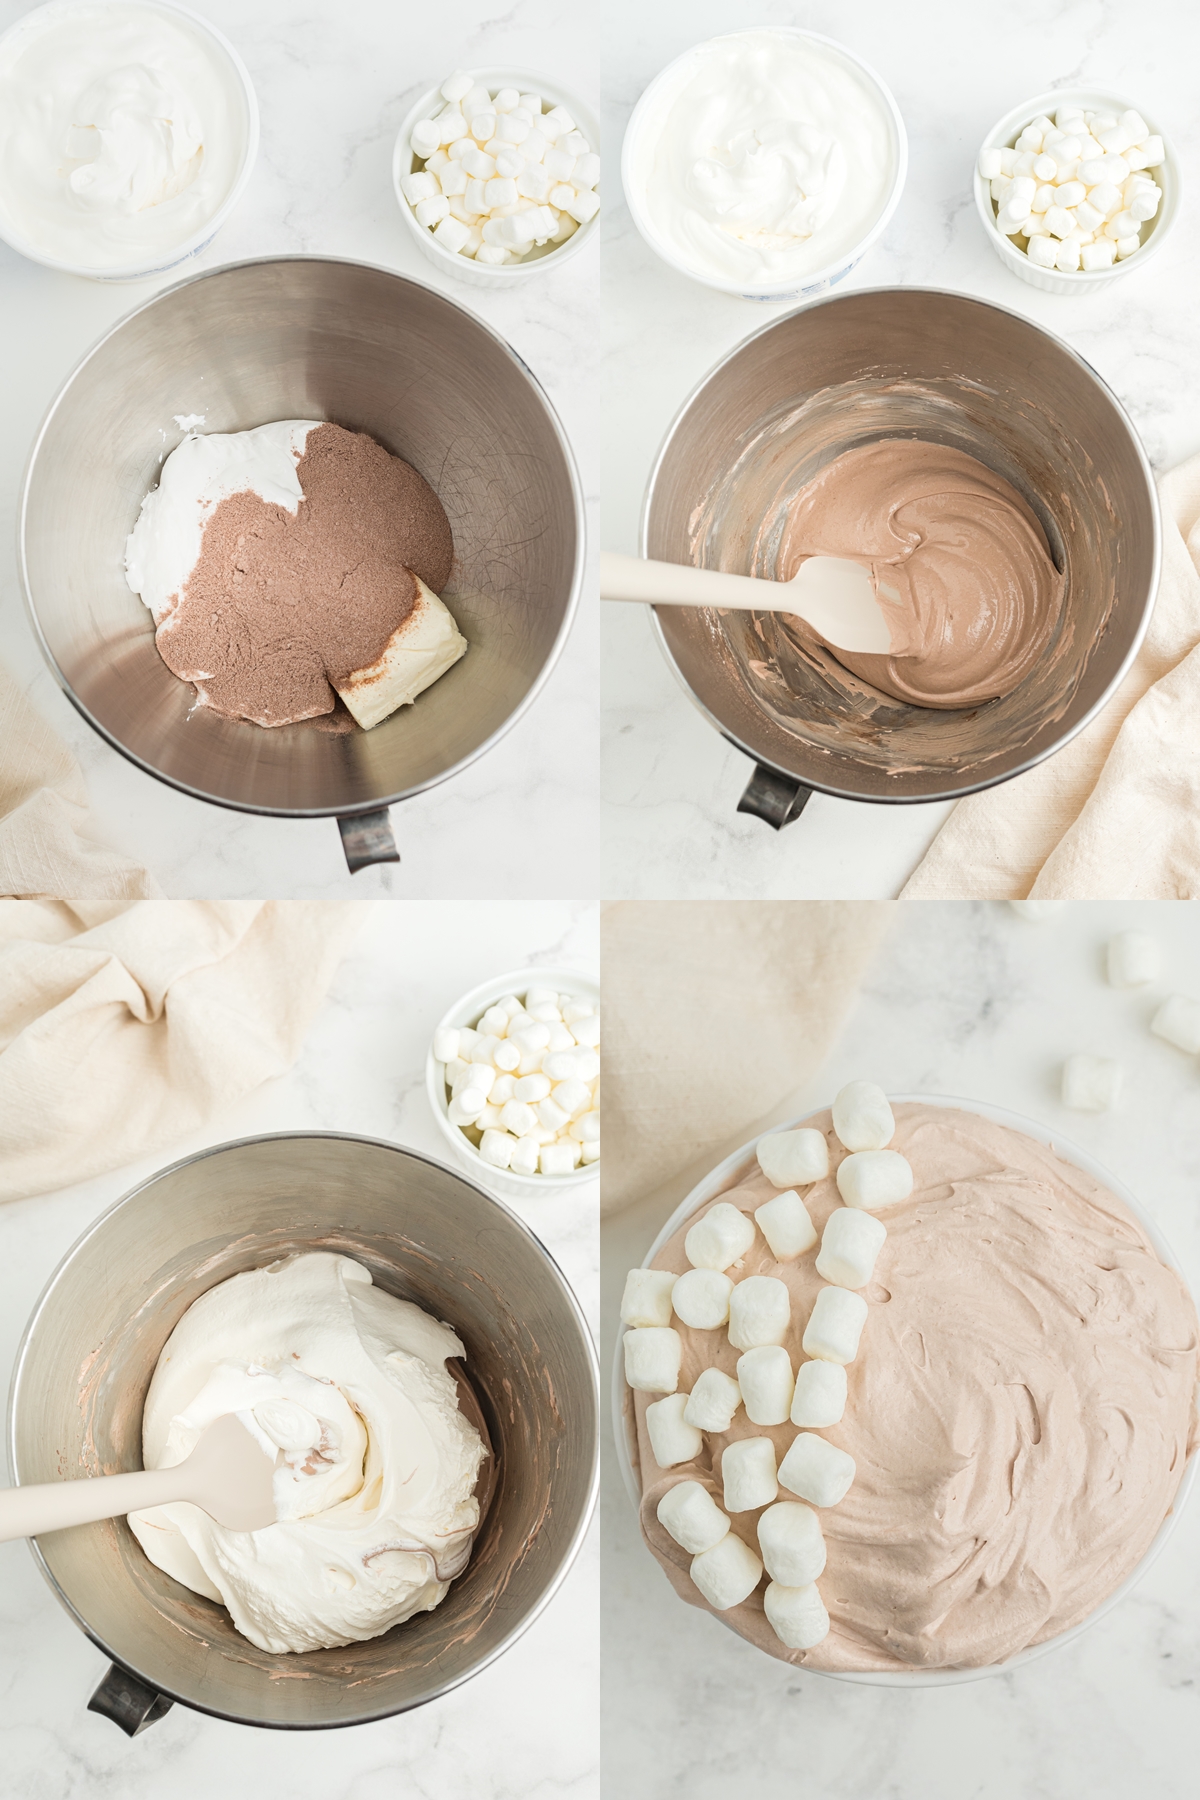 Procedure on making a hot chocolate dip. Mixing the ingredients such as marshmallow fluff, cream cheese, and cocoa powder until smooth.